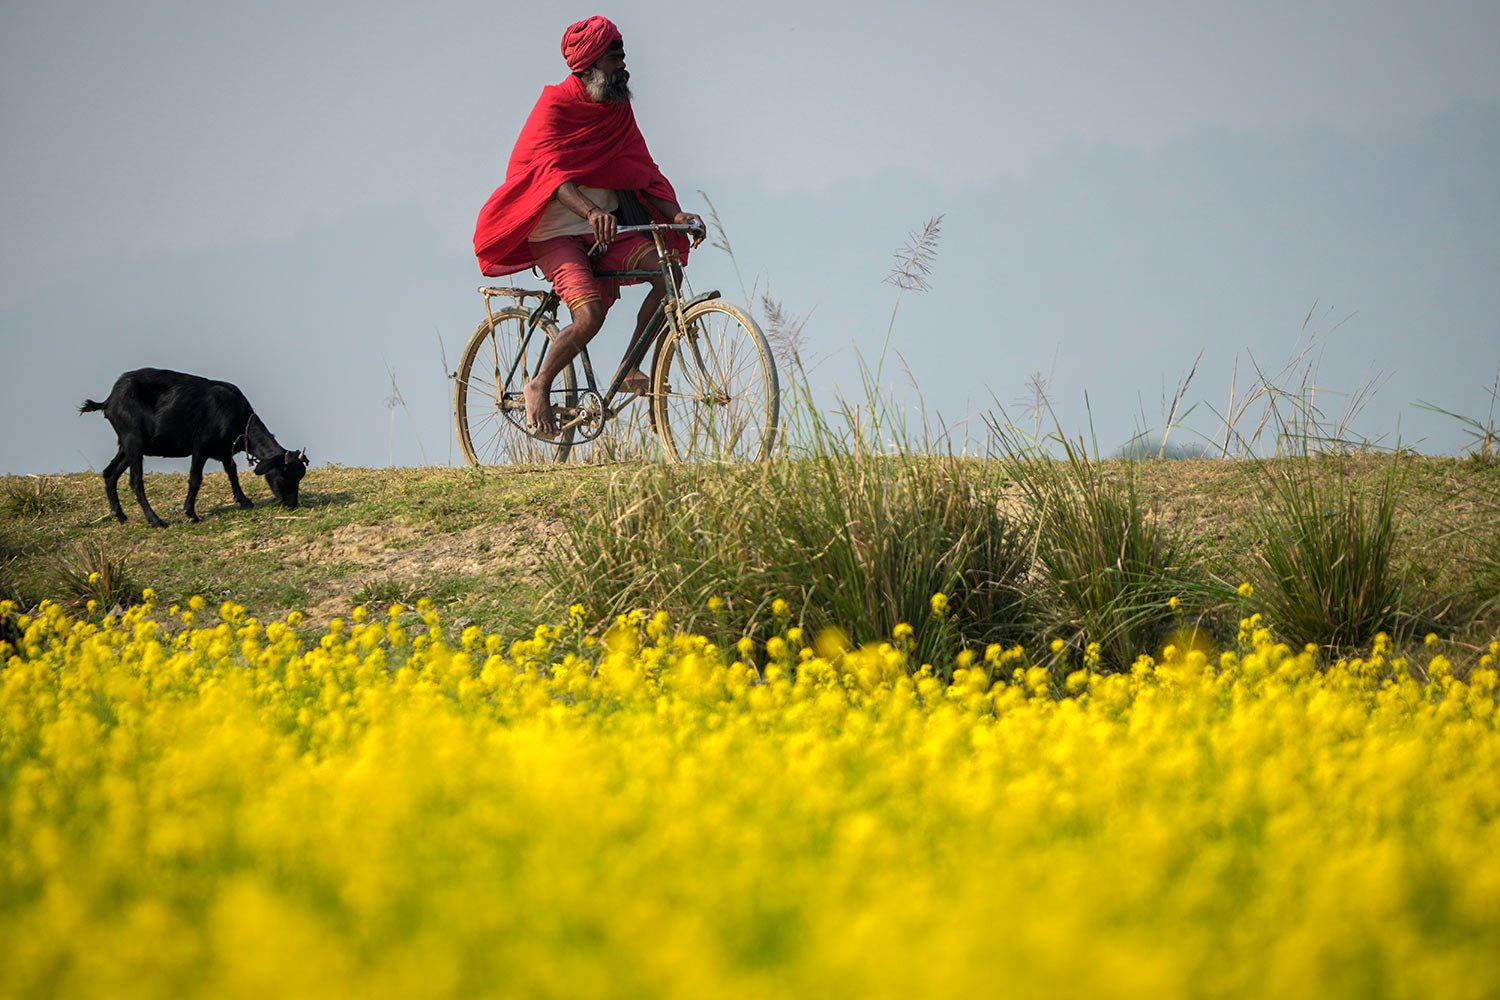  A Sadhu or Hindu holy man rides on a bicycle past mustard fields on the outskirts of Guwahati, India, Thursday, Dec. 22, 2022. (AP Photo/Anupam Nath) 